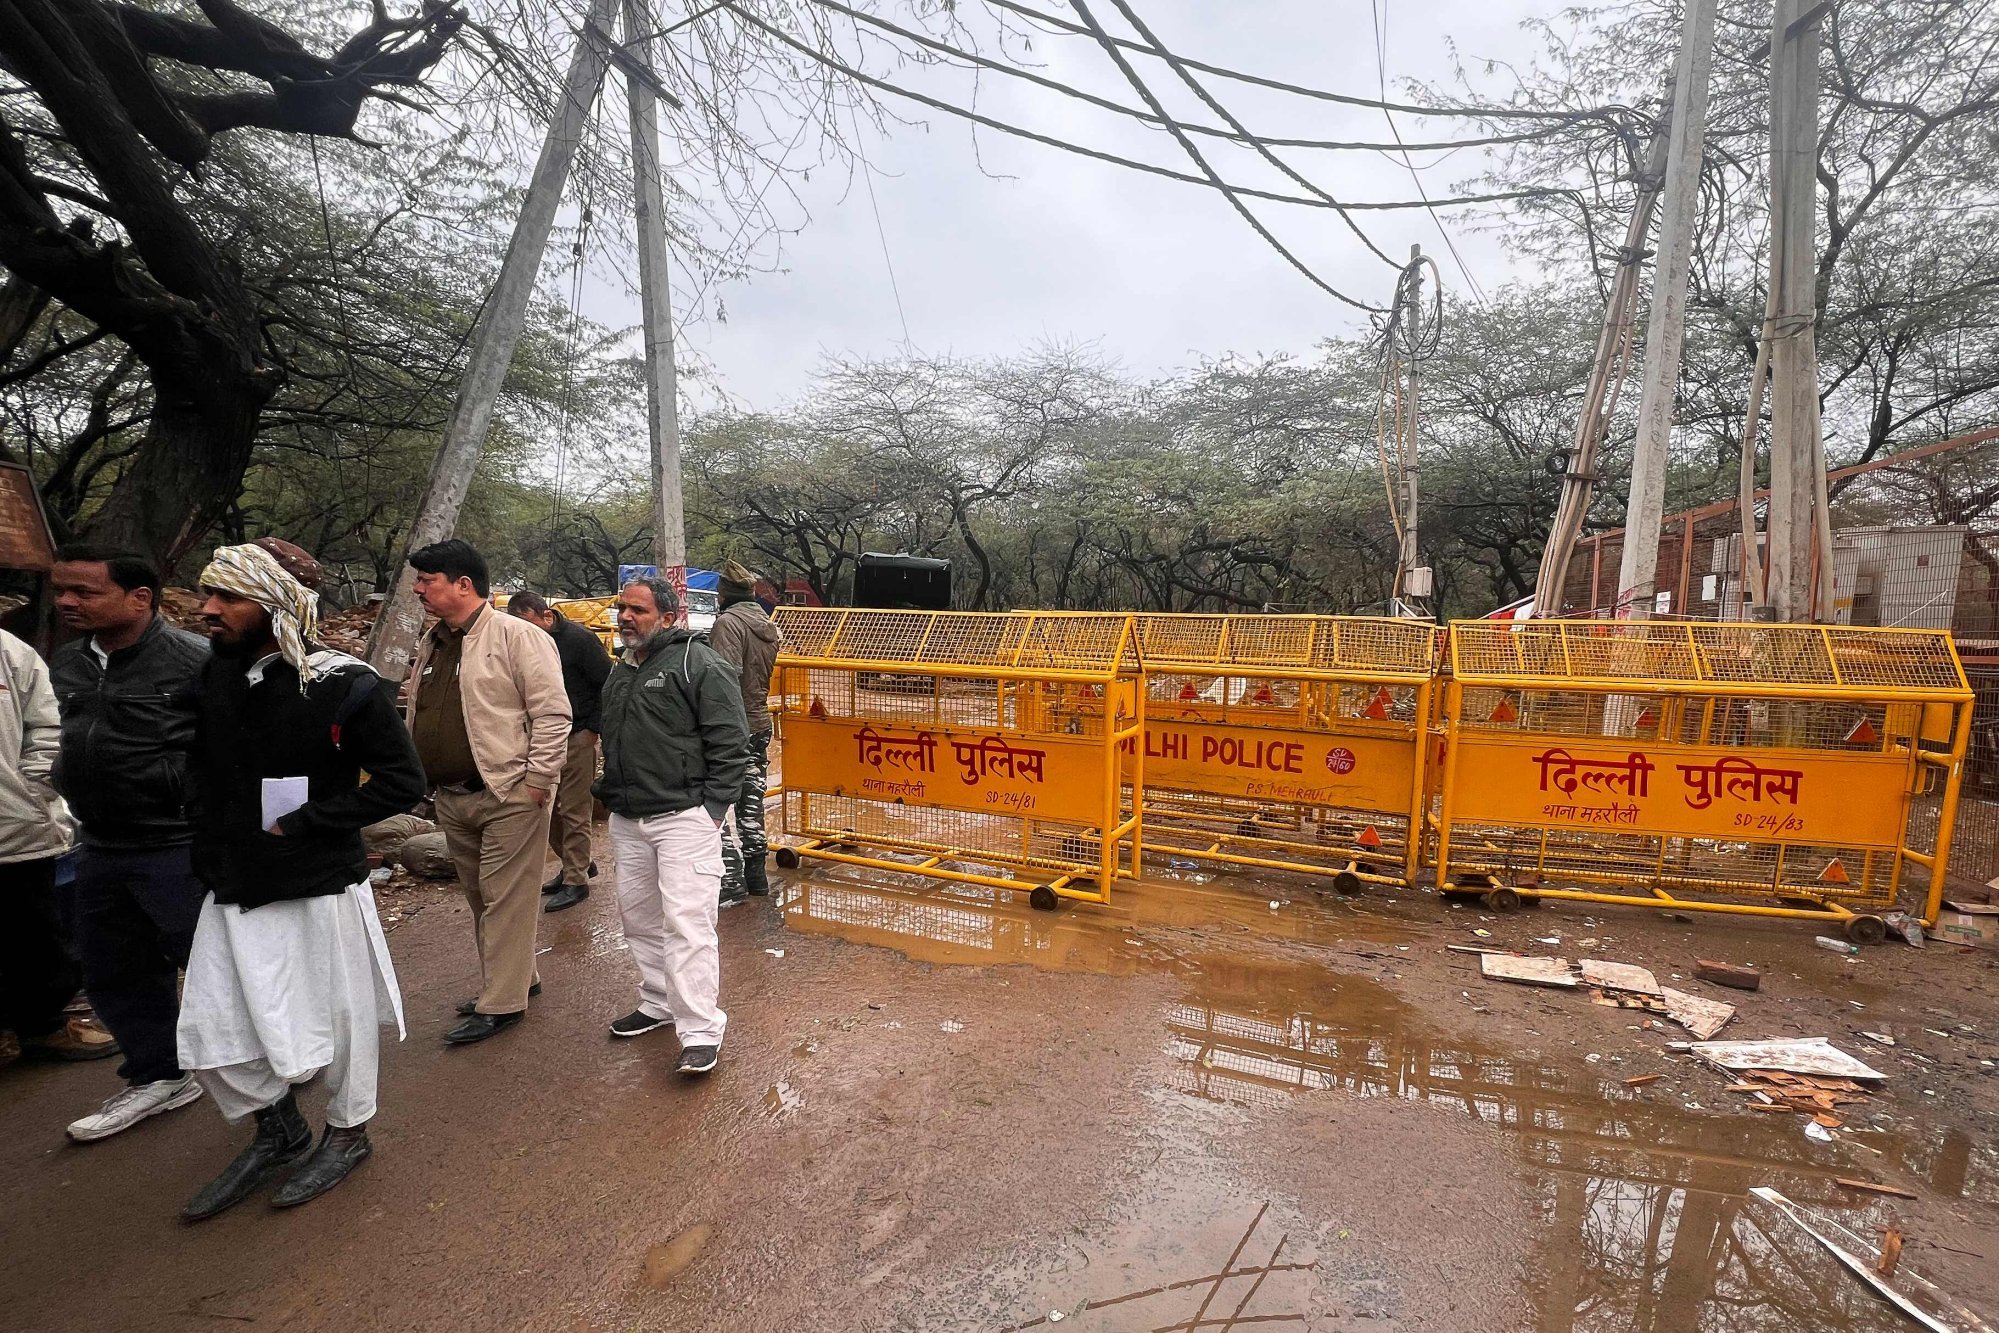 People gather near barriers placed at an entrance point to the site of a mosque demolished by local authorities over claims that it was an illegal construction in the Mehrauli area of New Delhi, India, on February 1. Photo: AFP